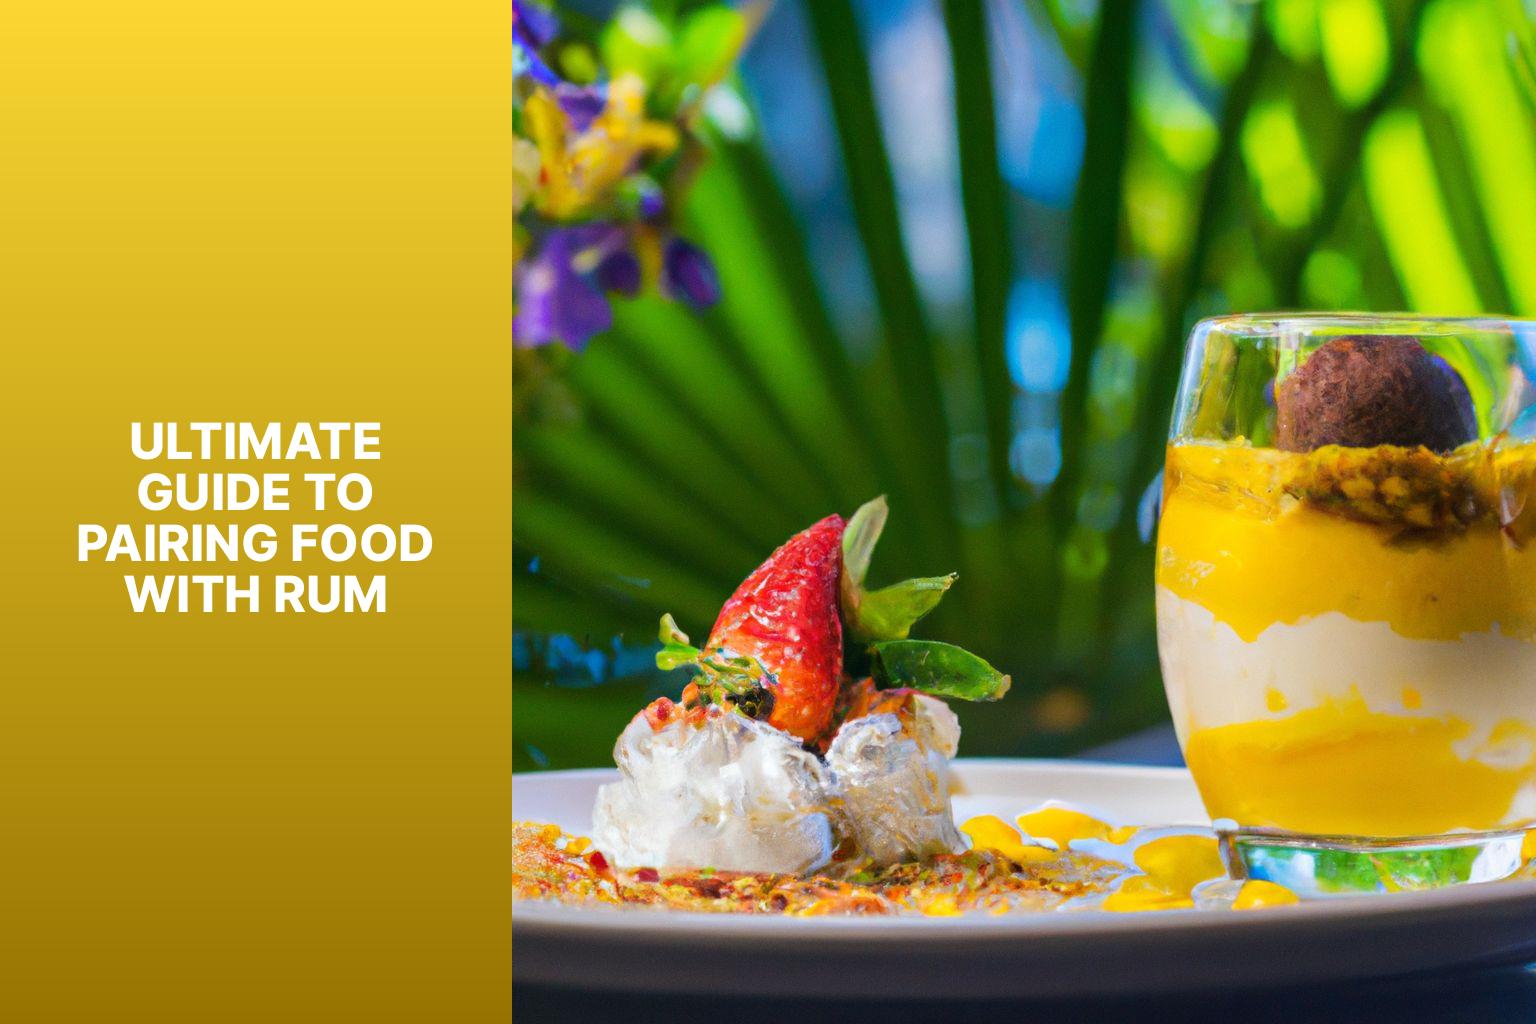 Ultimate Guide to Pairing Food with Rum